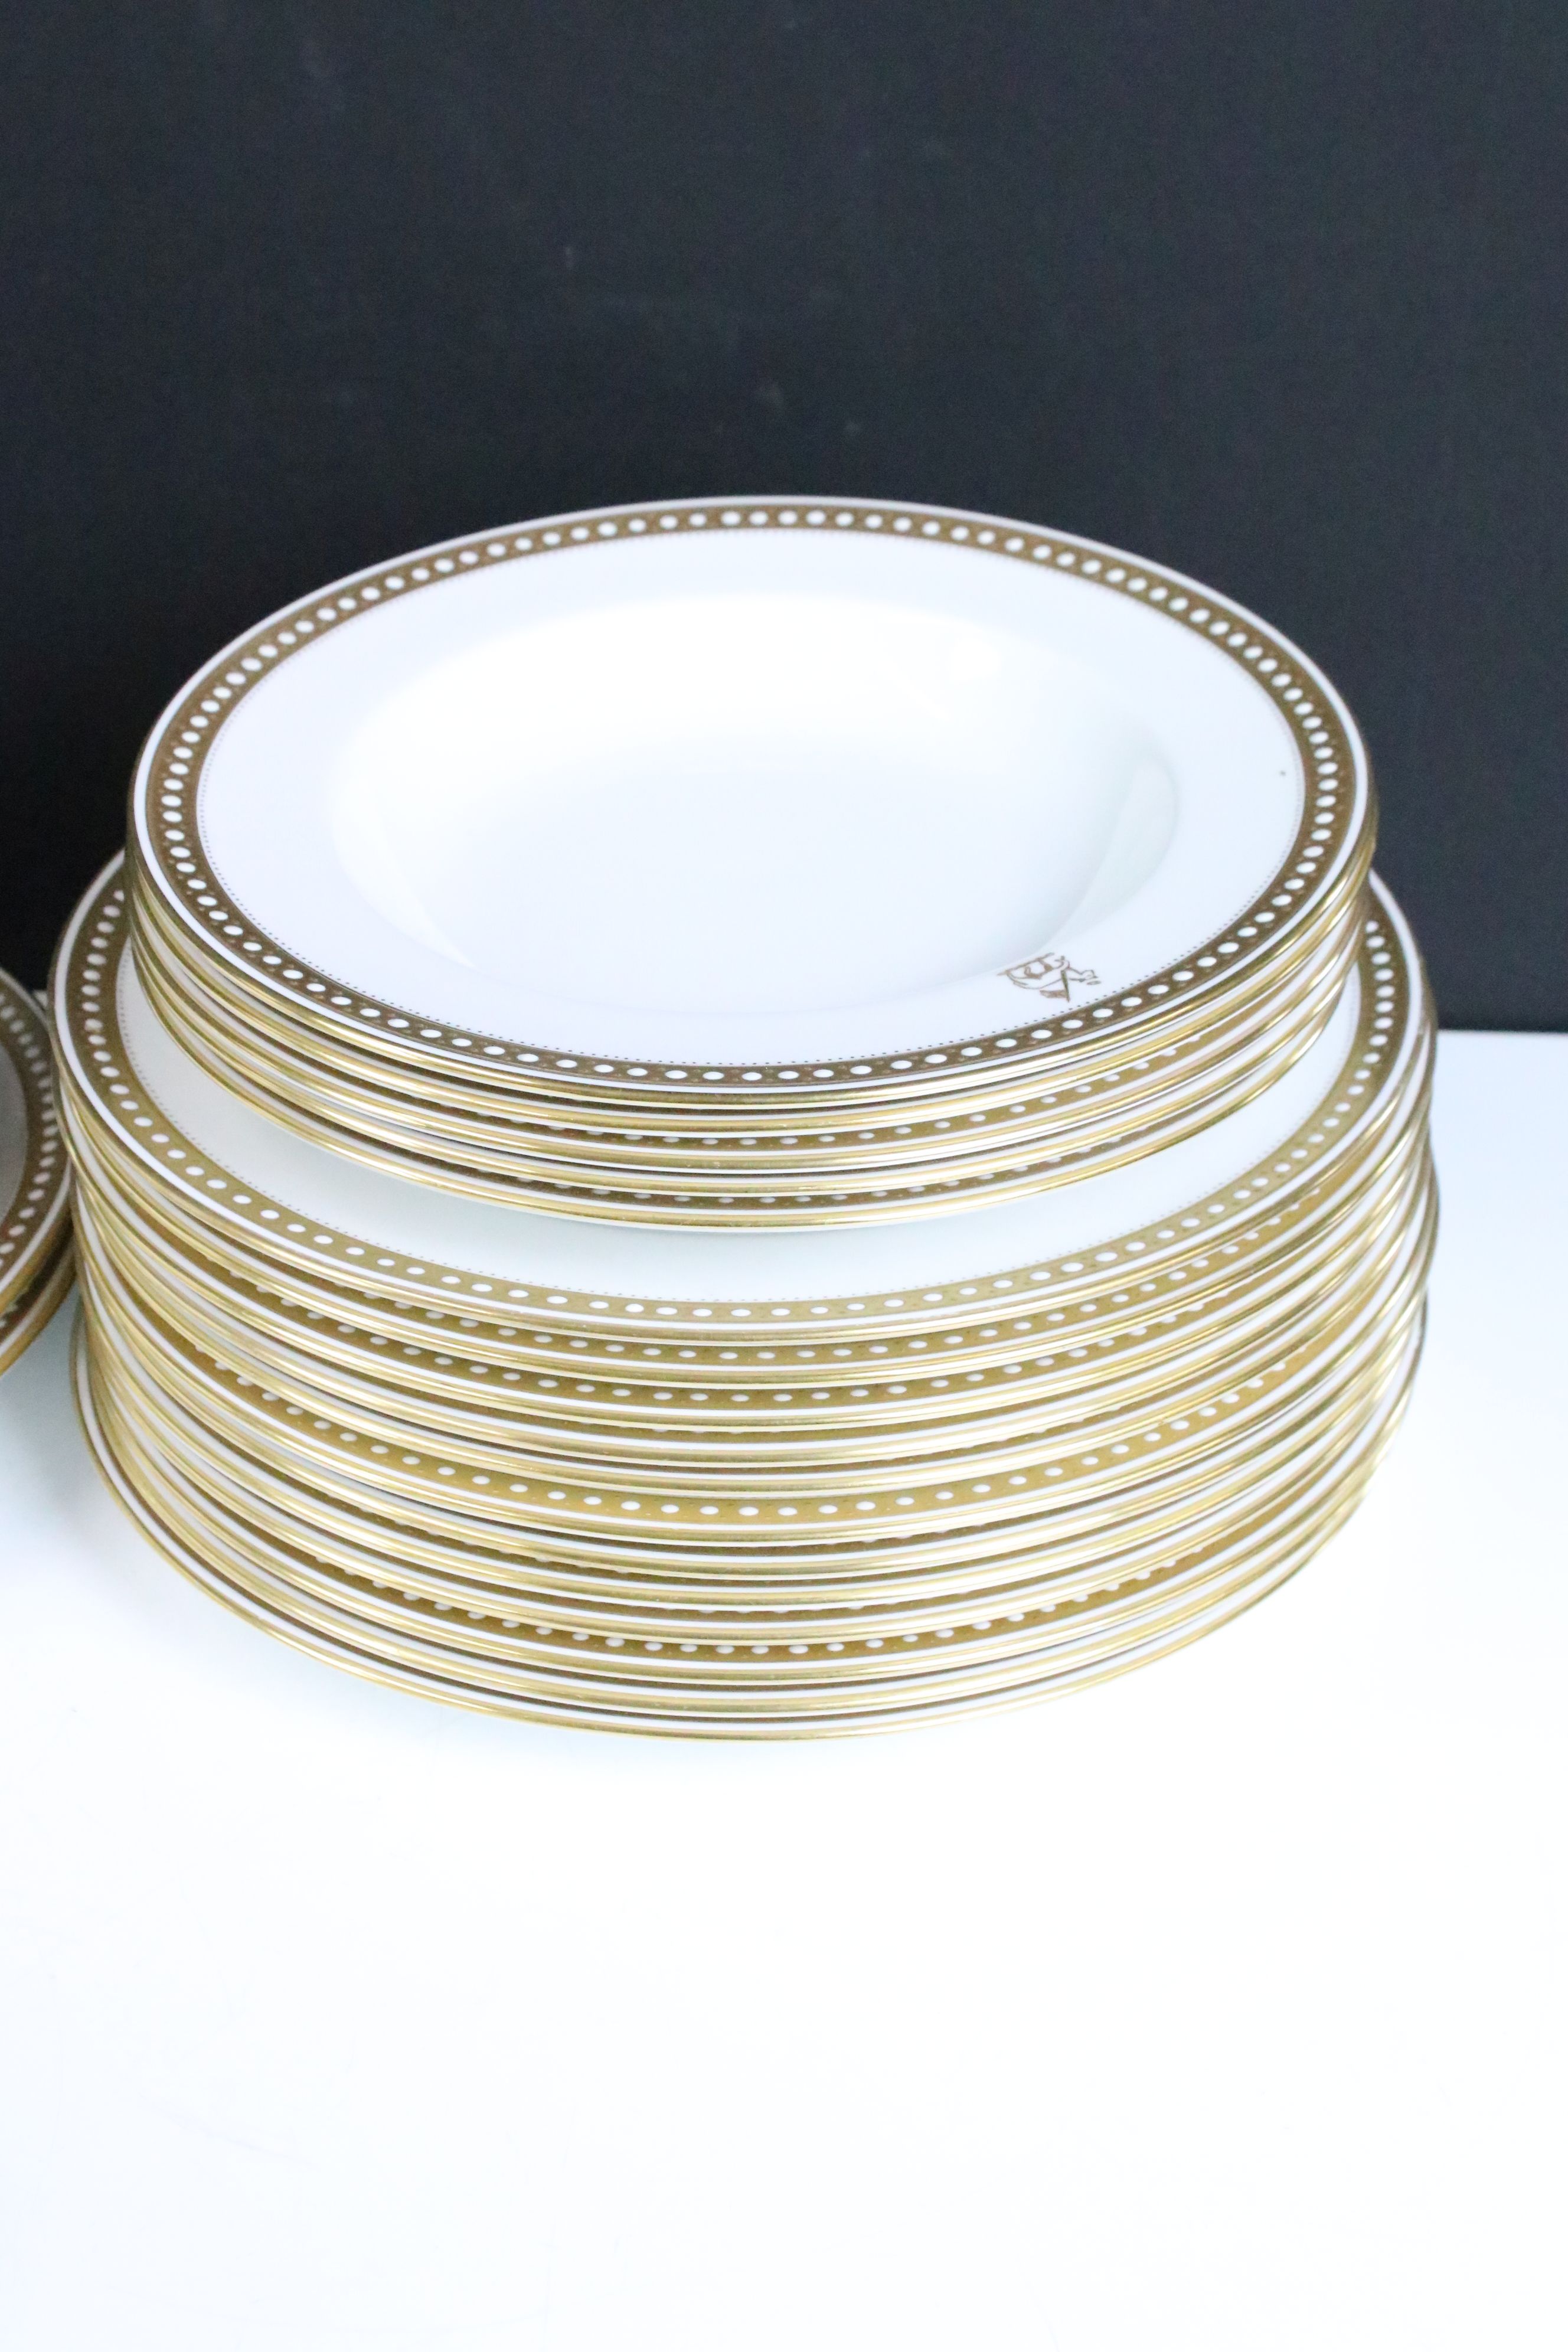 Early 20th Spode dinner service retailed by Thomas Goode & Co Ltd having a white ground with gilt - Image 2 of 6